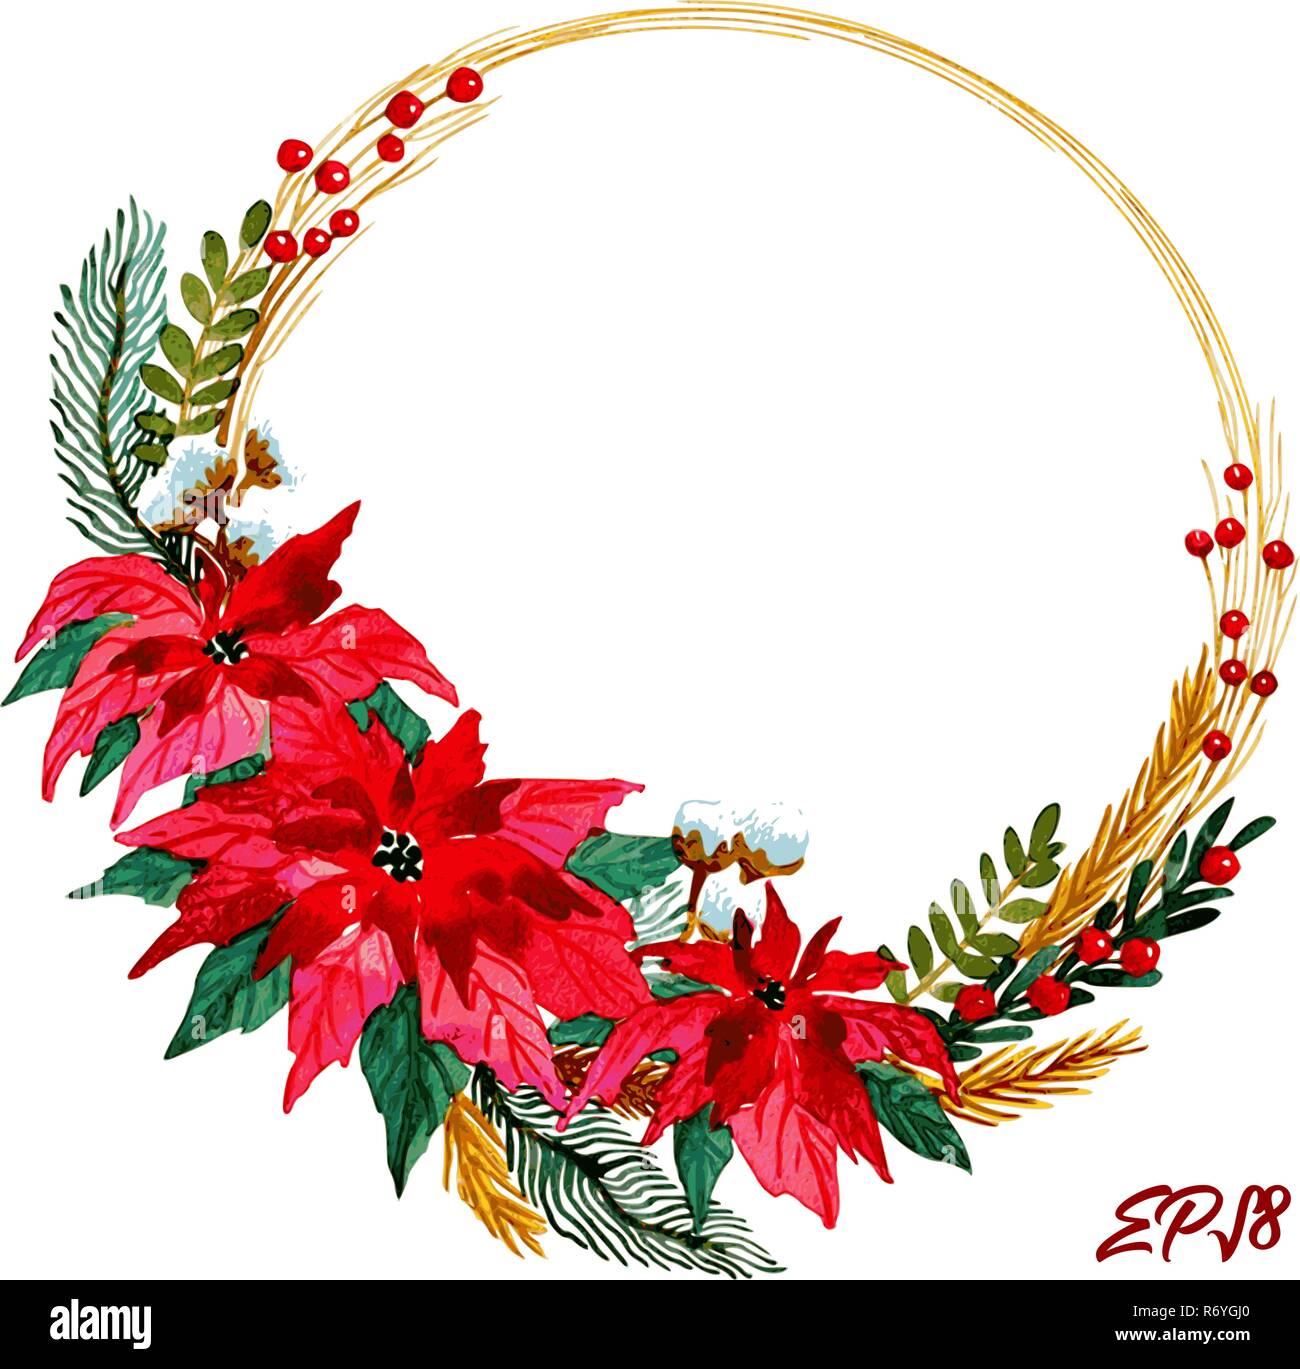 Christmas wreath with beautiful poinsettia flowers, red berries and golden lining. Hand painted watercolor vector illustration on white background. Stock Vector